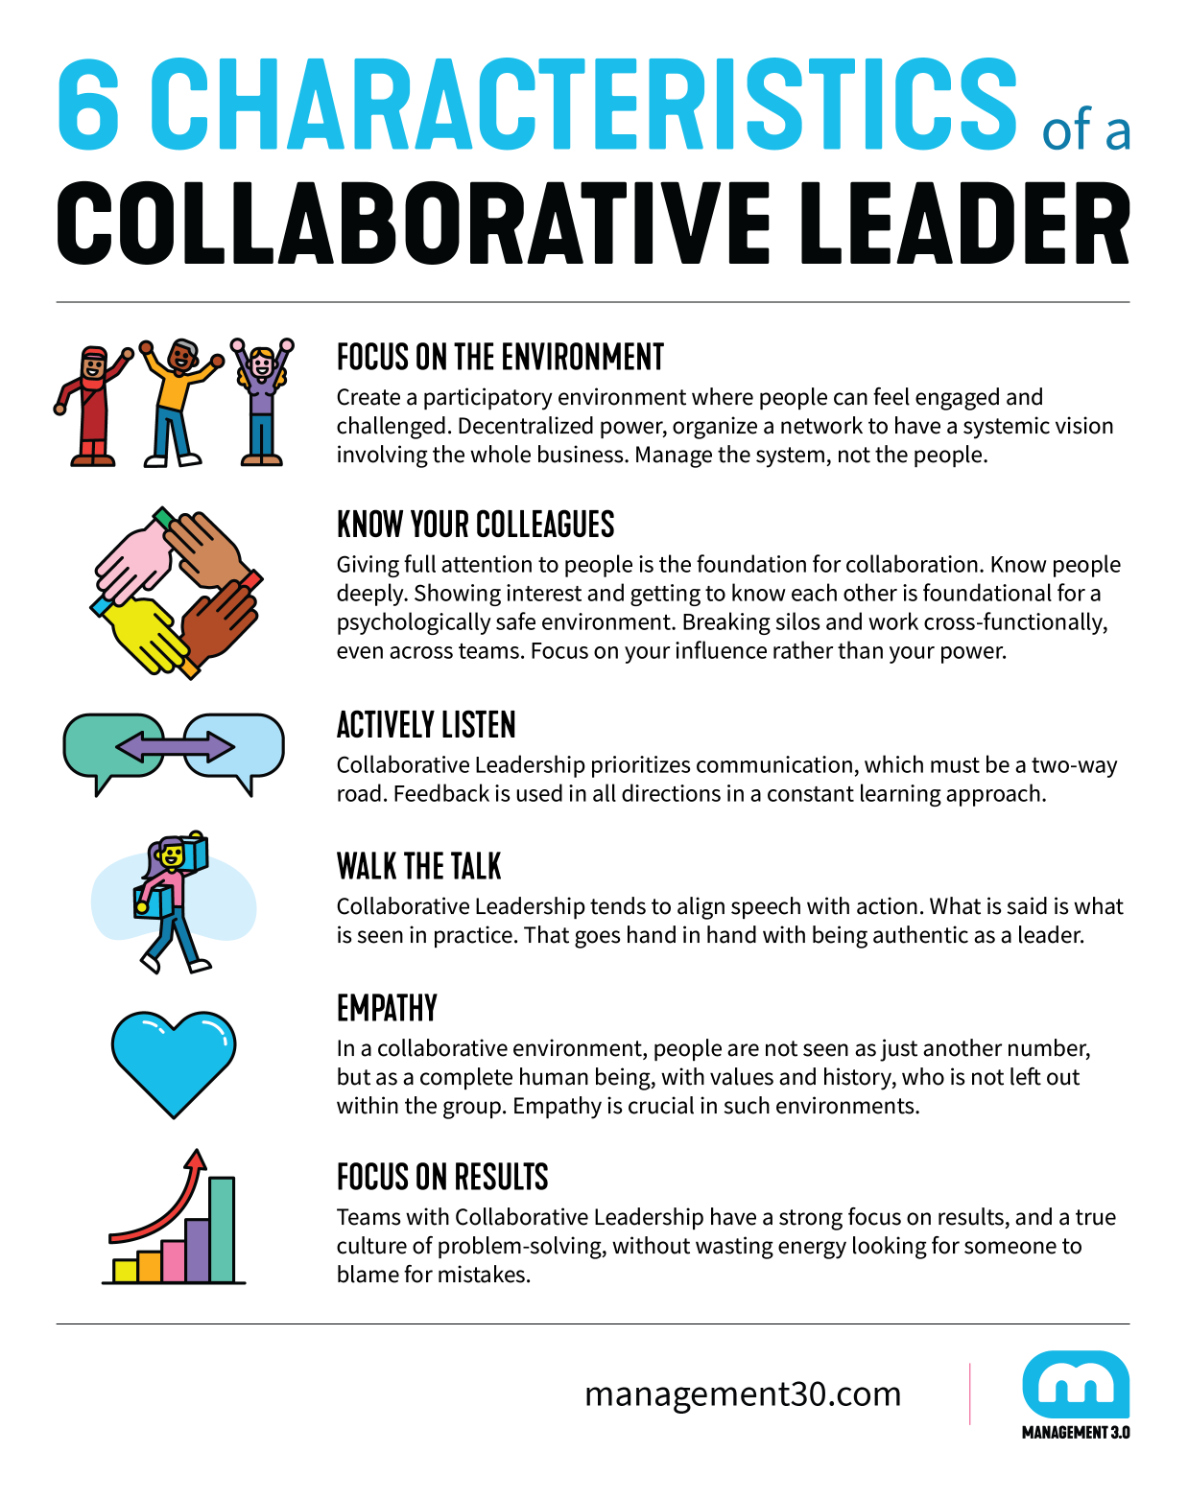 collaboration and leadership